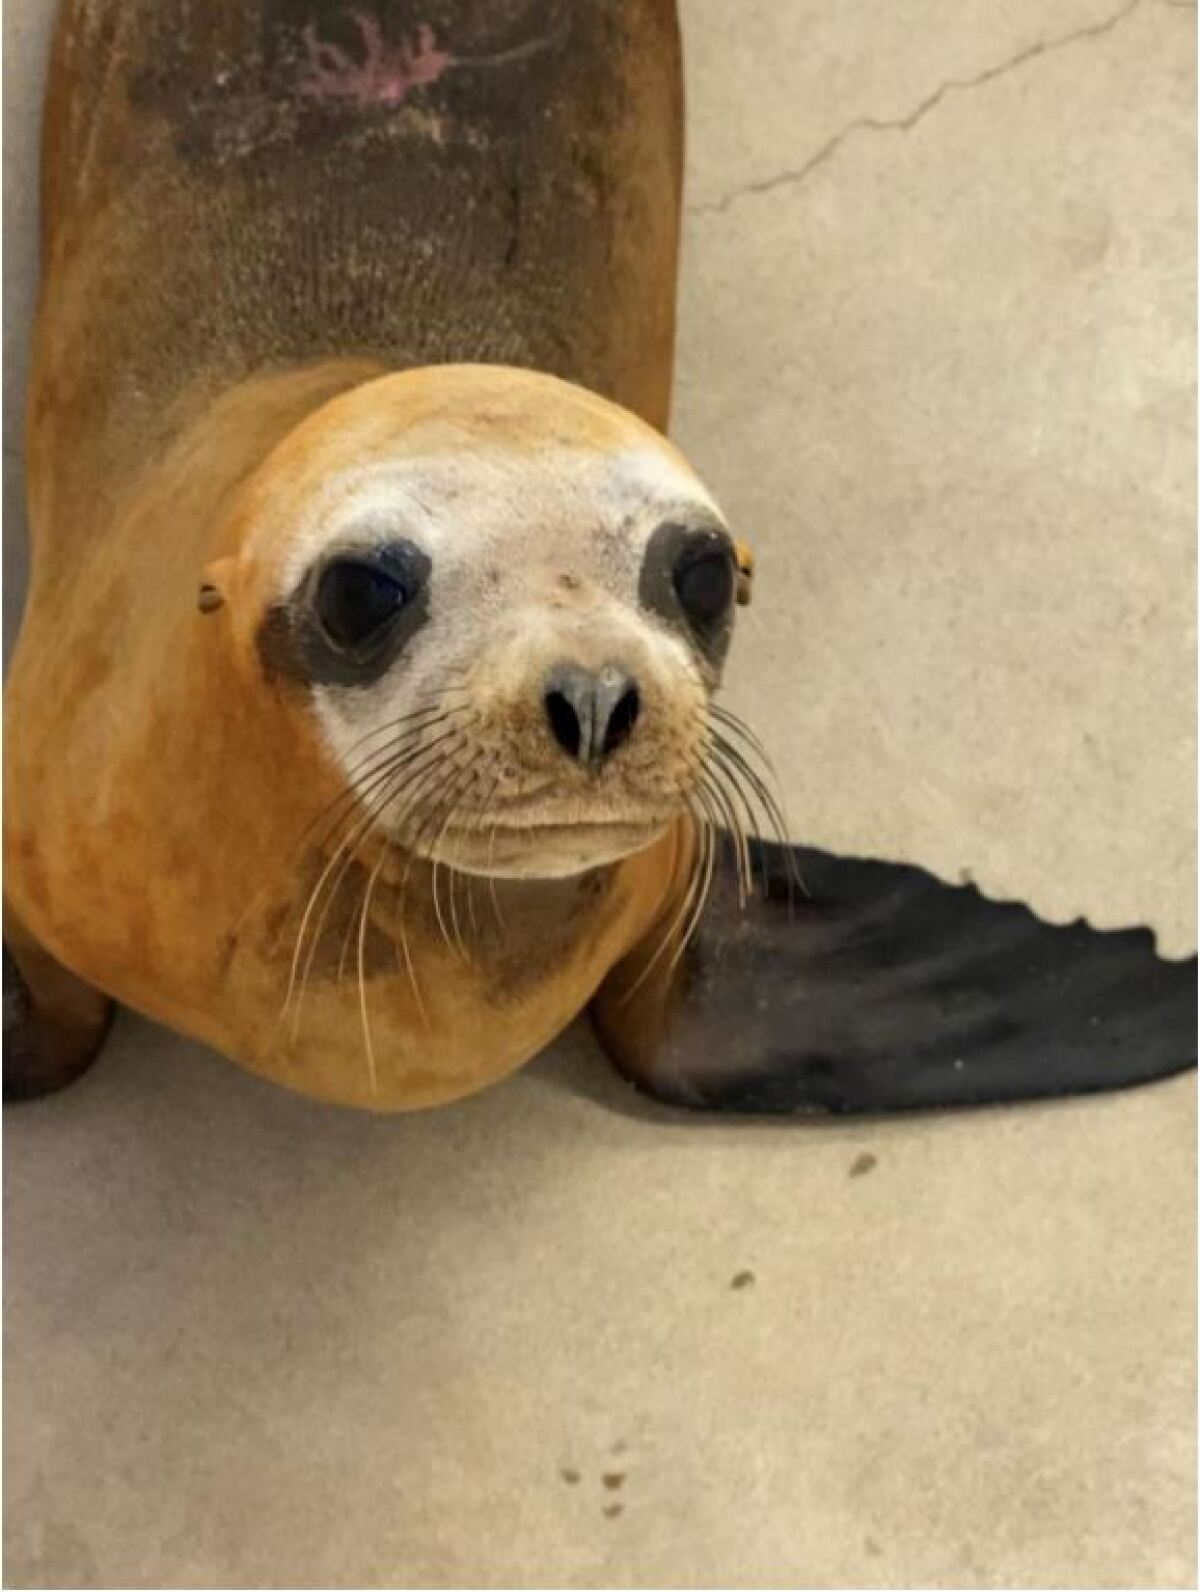 The 1-year-old sea lion, named Mandalorian, was euthanized Dec. 22 after being found with two gunshot wounds.